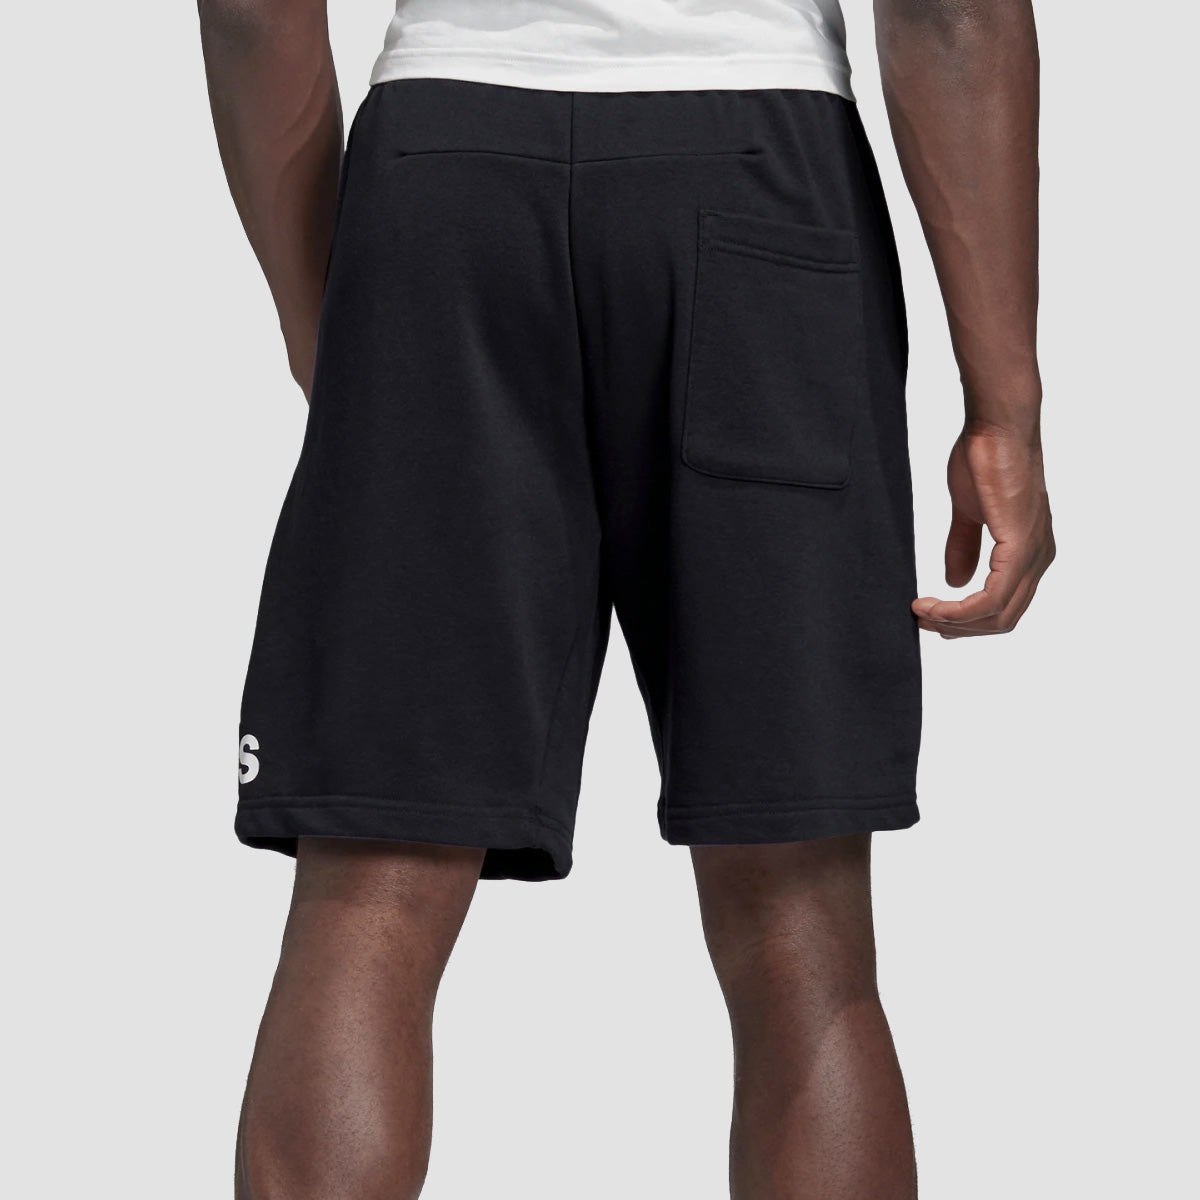 adidas Must Have BOS Shorts Black/White